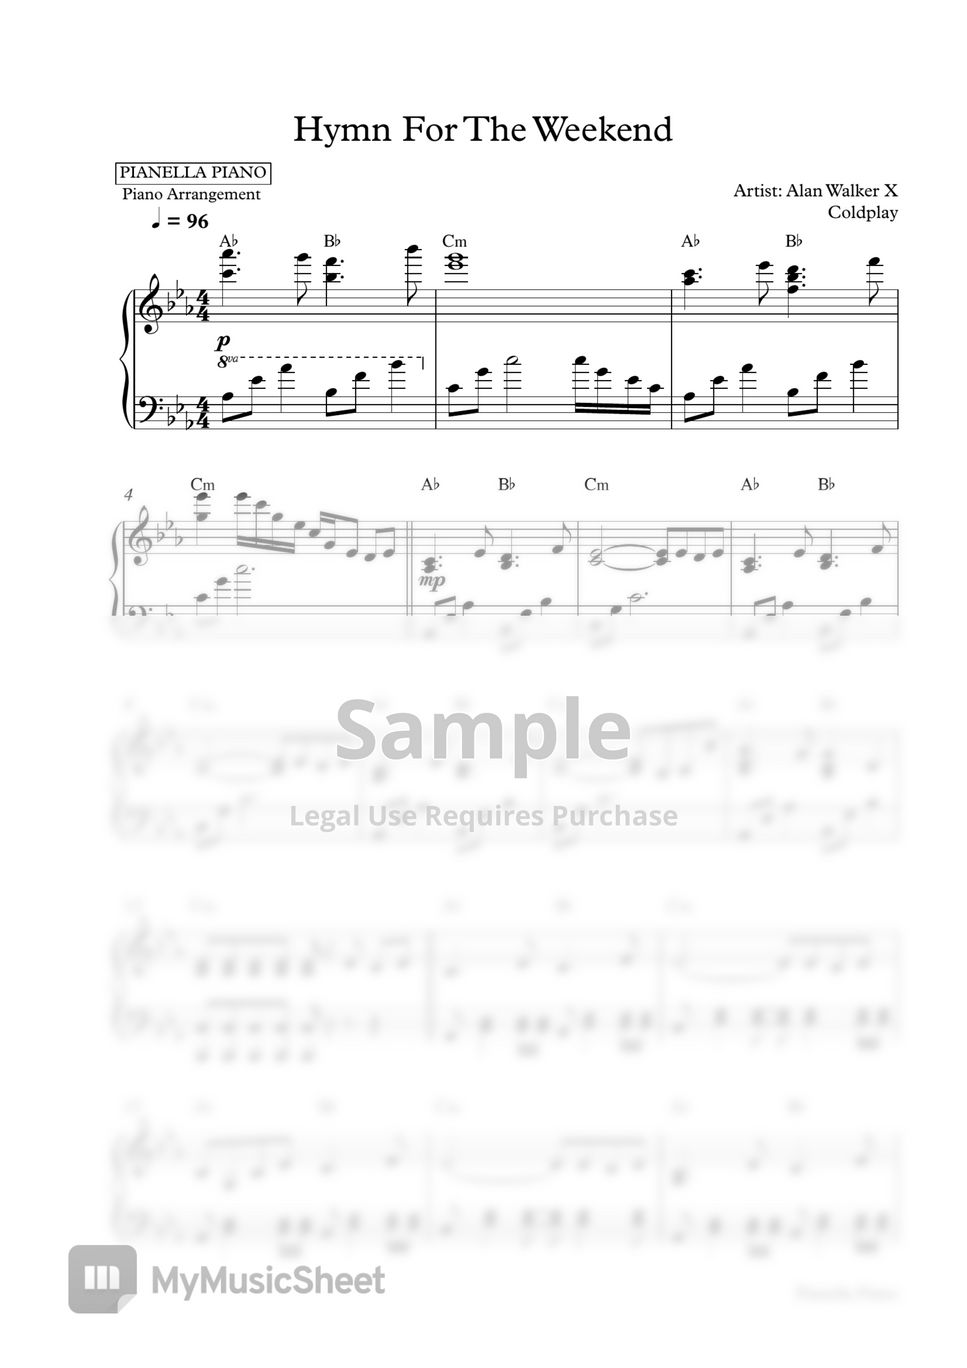 Alan Walker X Coldplay - Hymn For The Weekend (Piano Sheet) by Pianella Piano